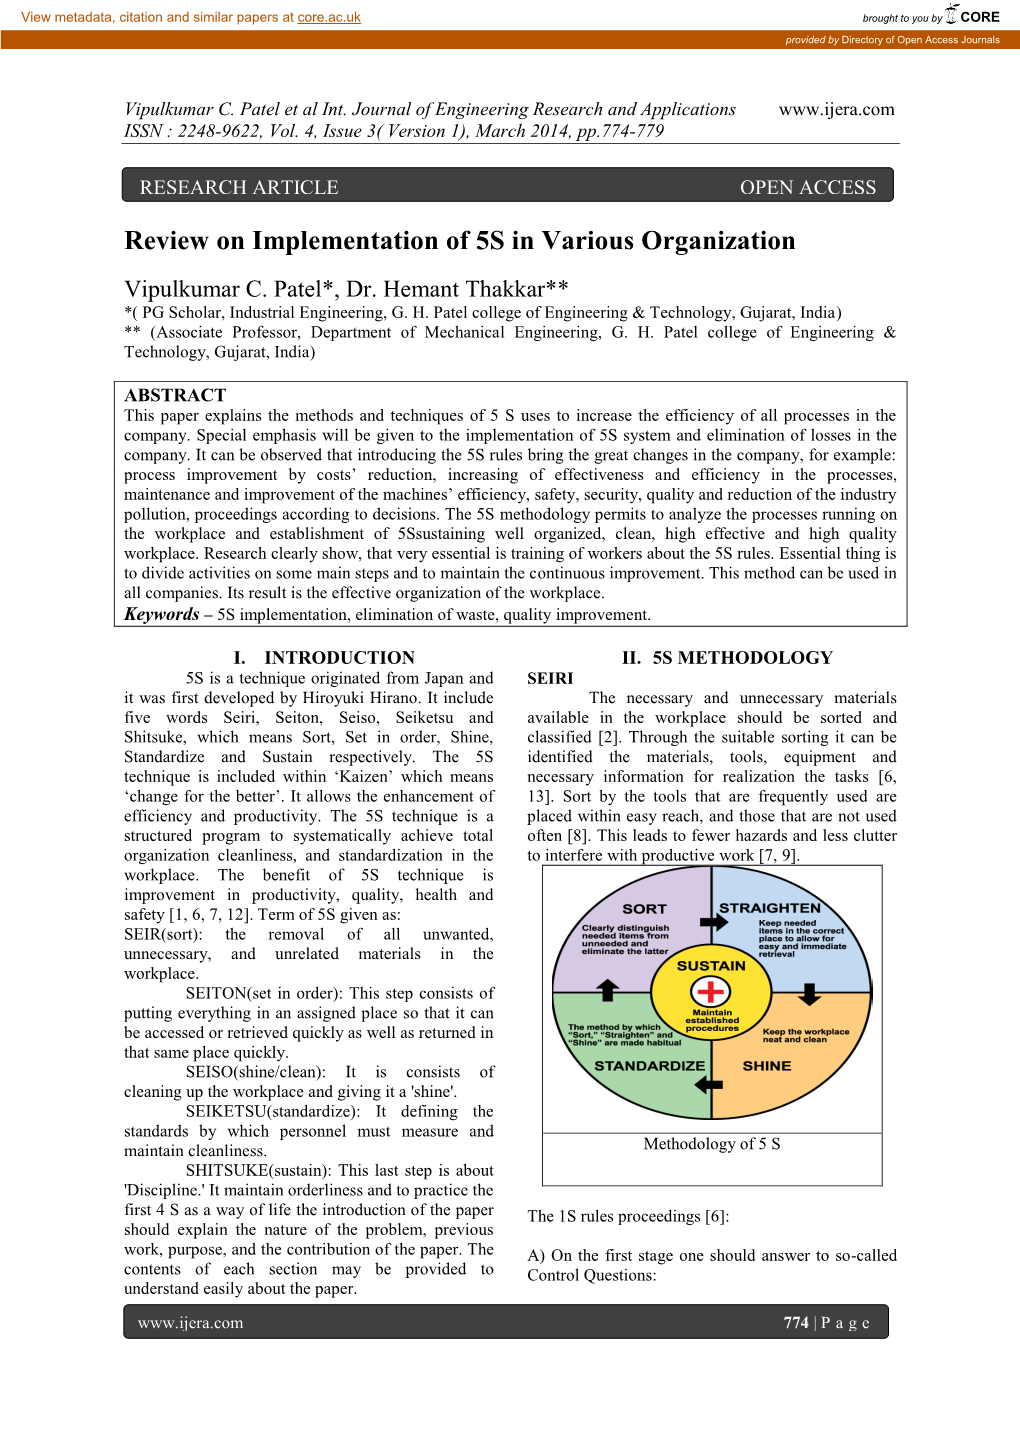 Review on Implementation of 5S in Various Organization